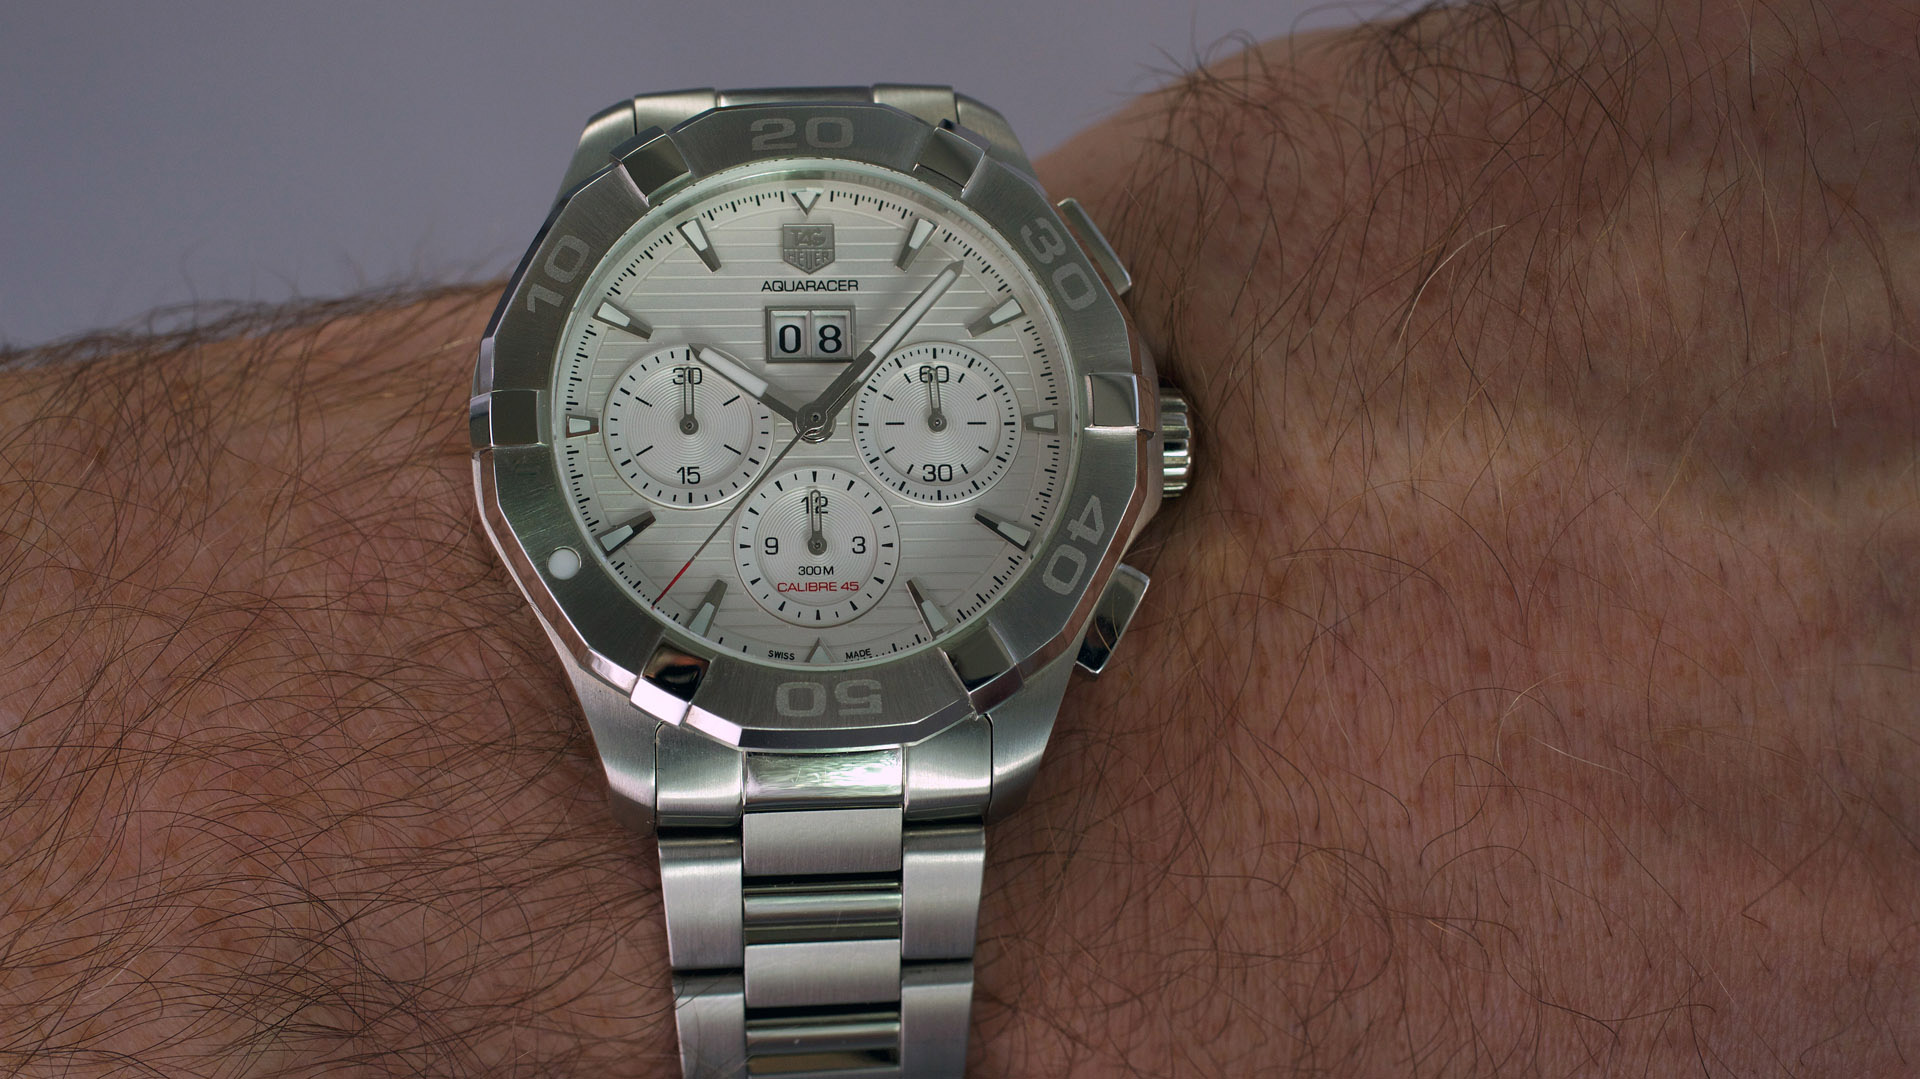 The white dials fake watches are designed for men.